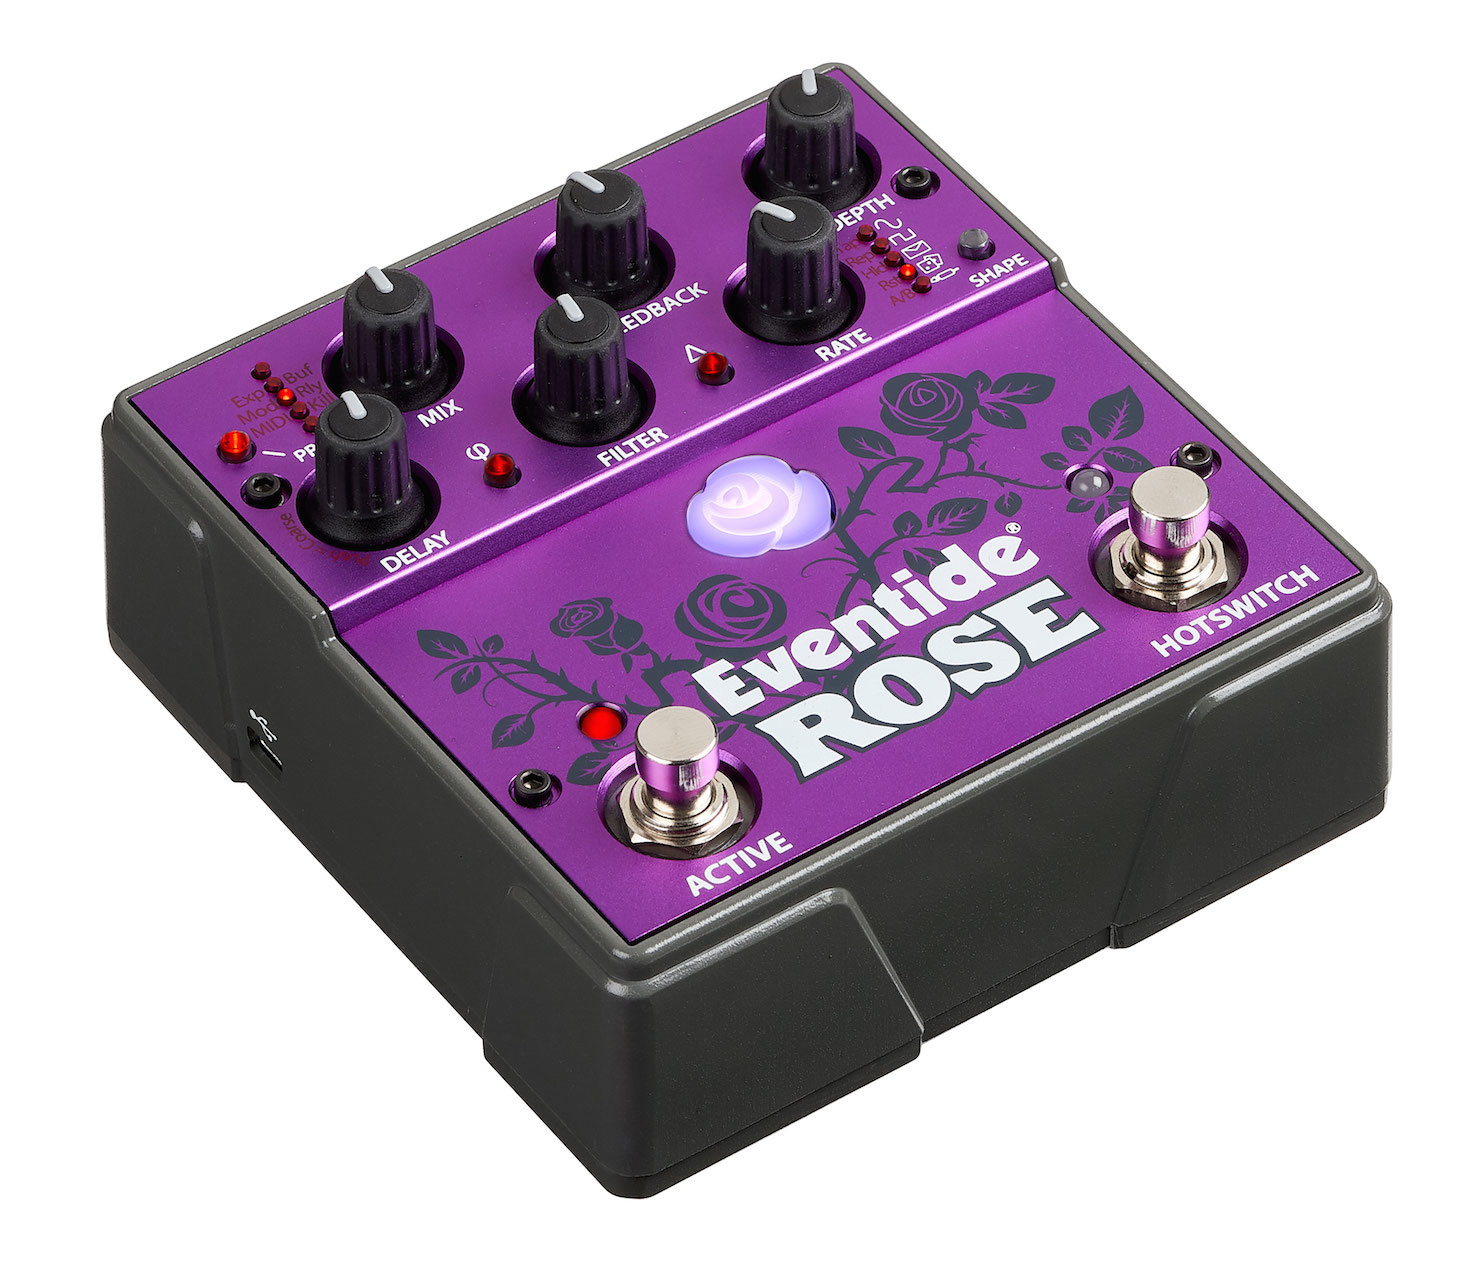 New Gear Review: Rose Delay Pedal by Eventide